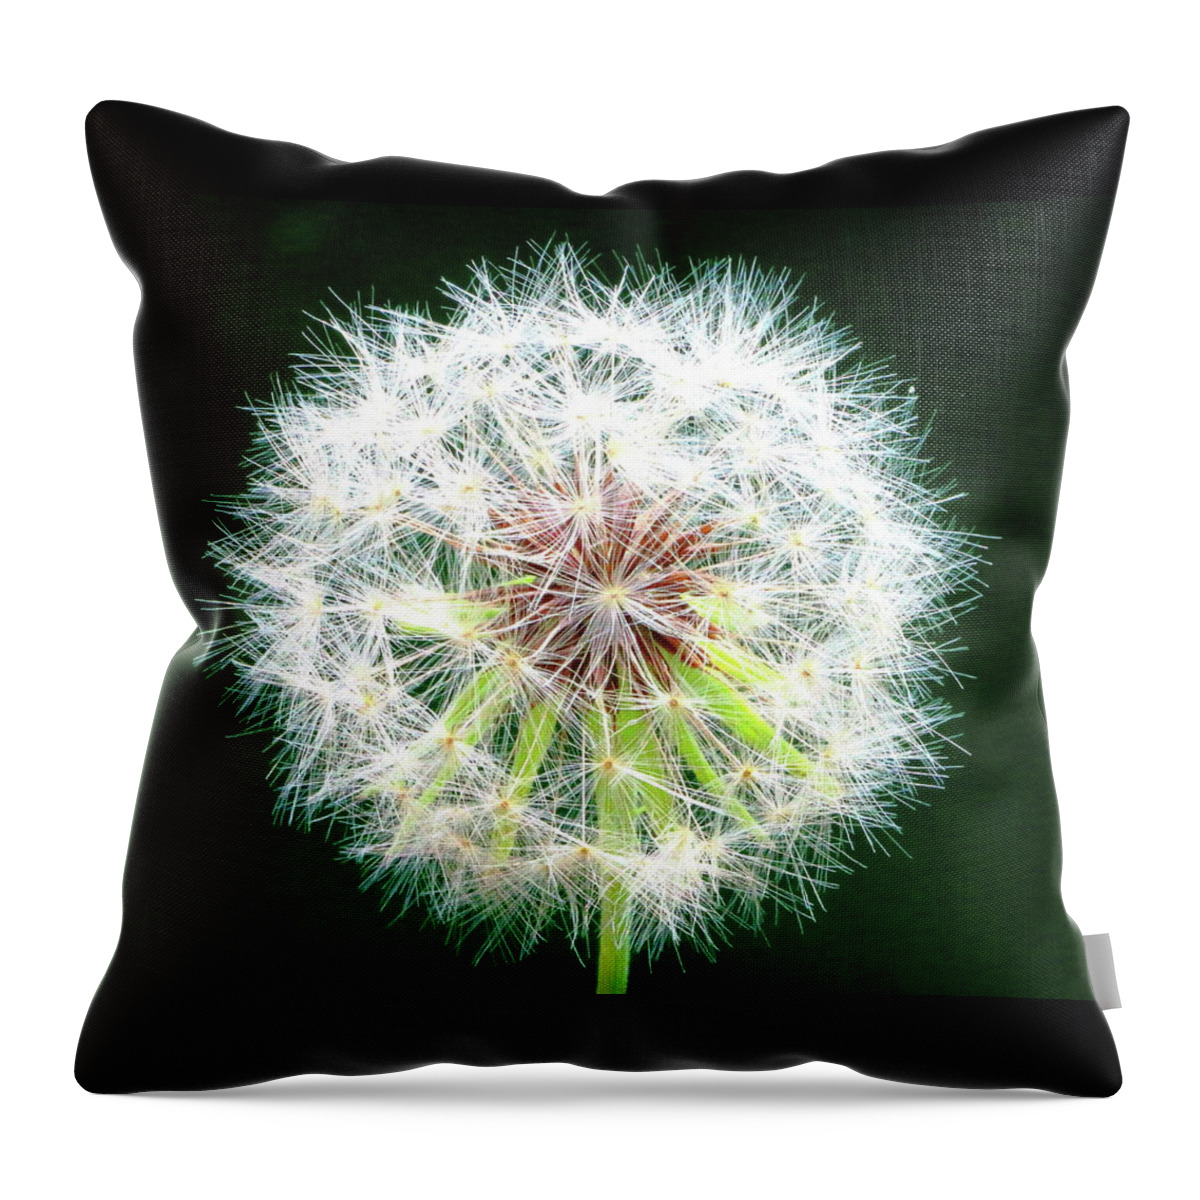 Dandelion Throw Pillow featuring the photograph Green Geometry by Larry Beat